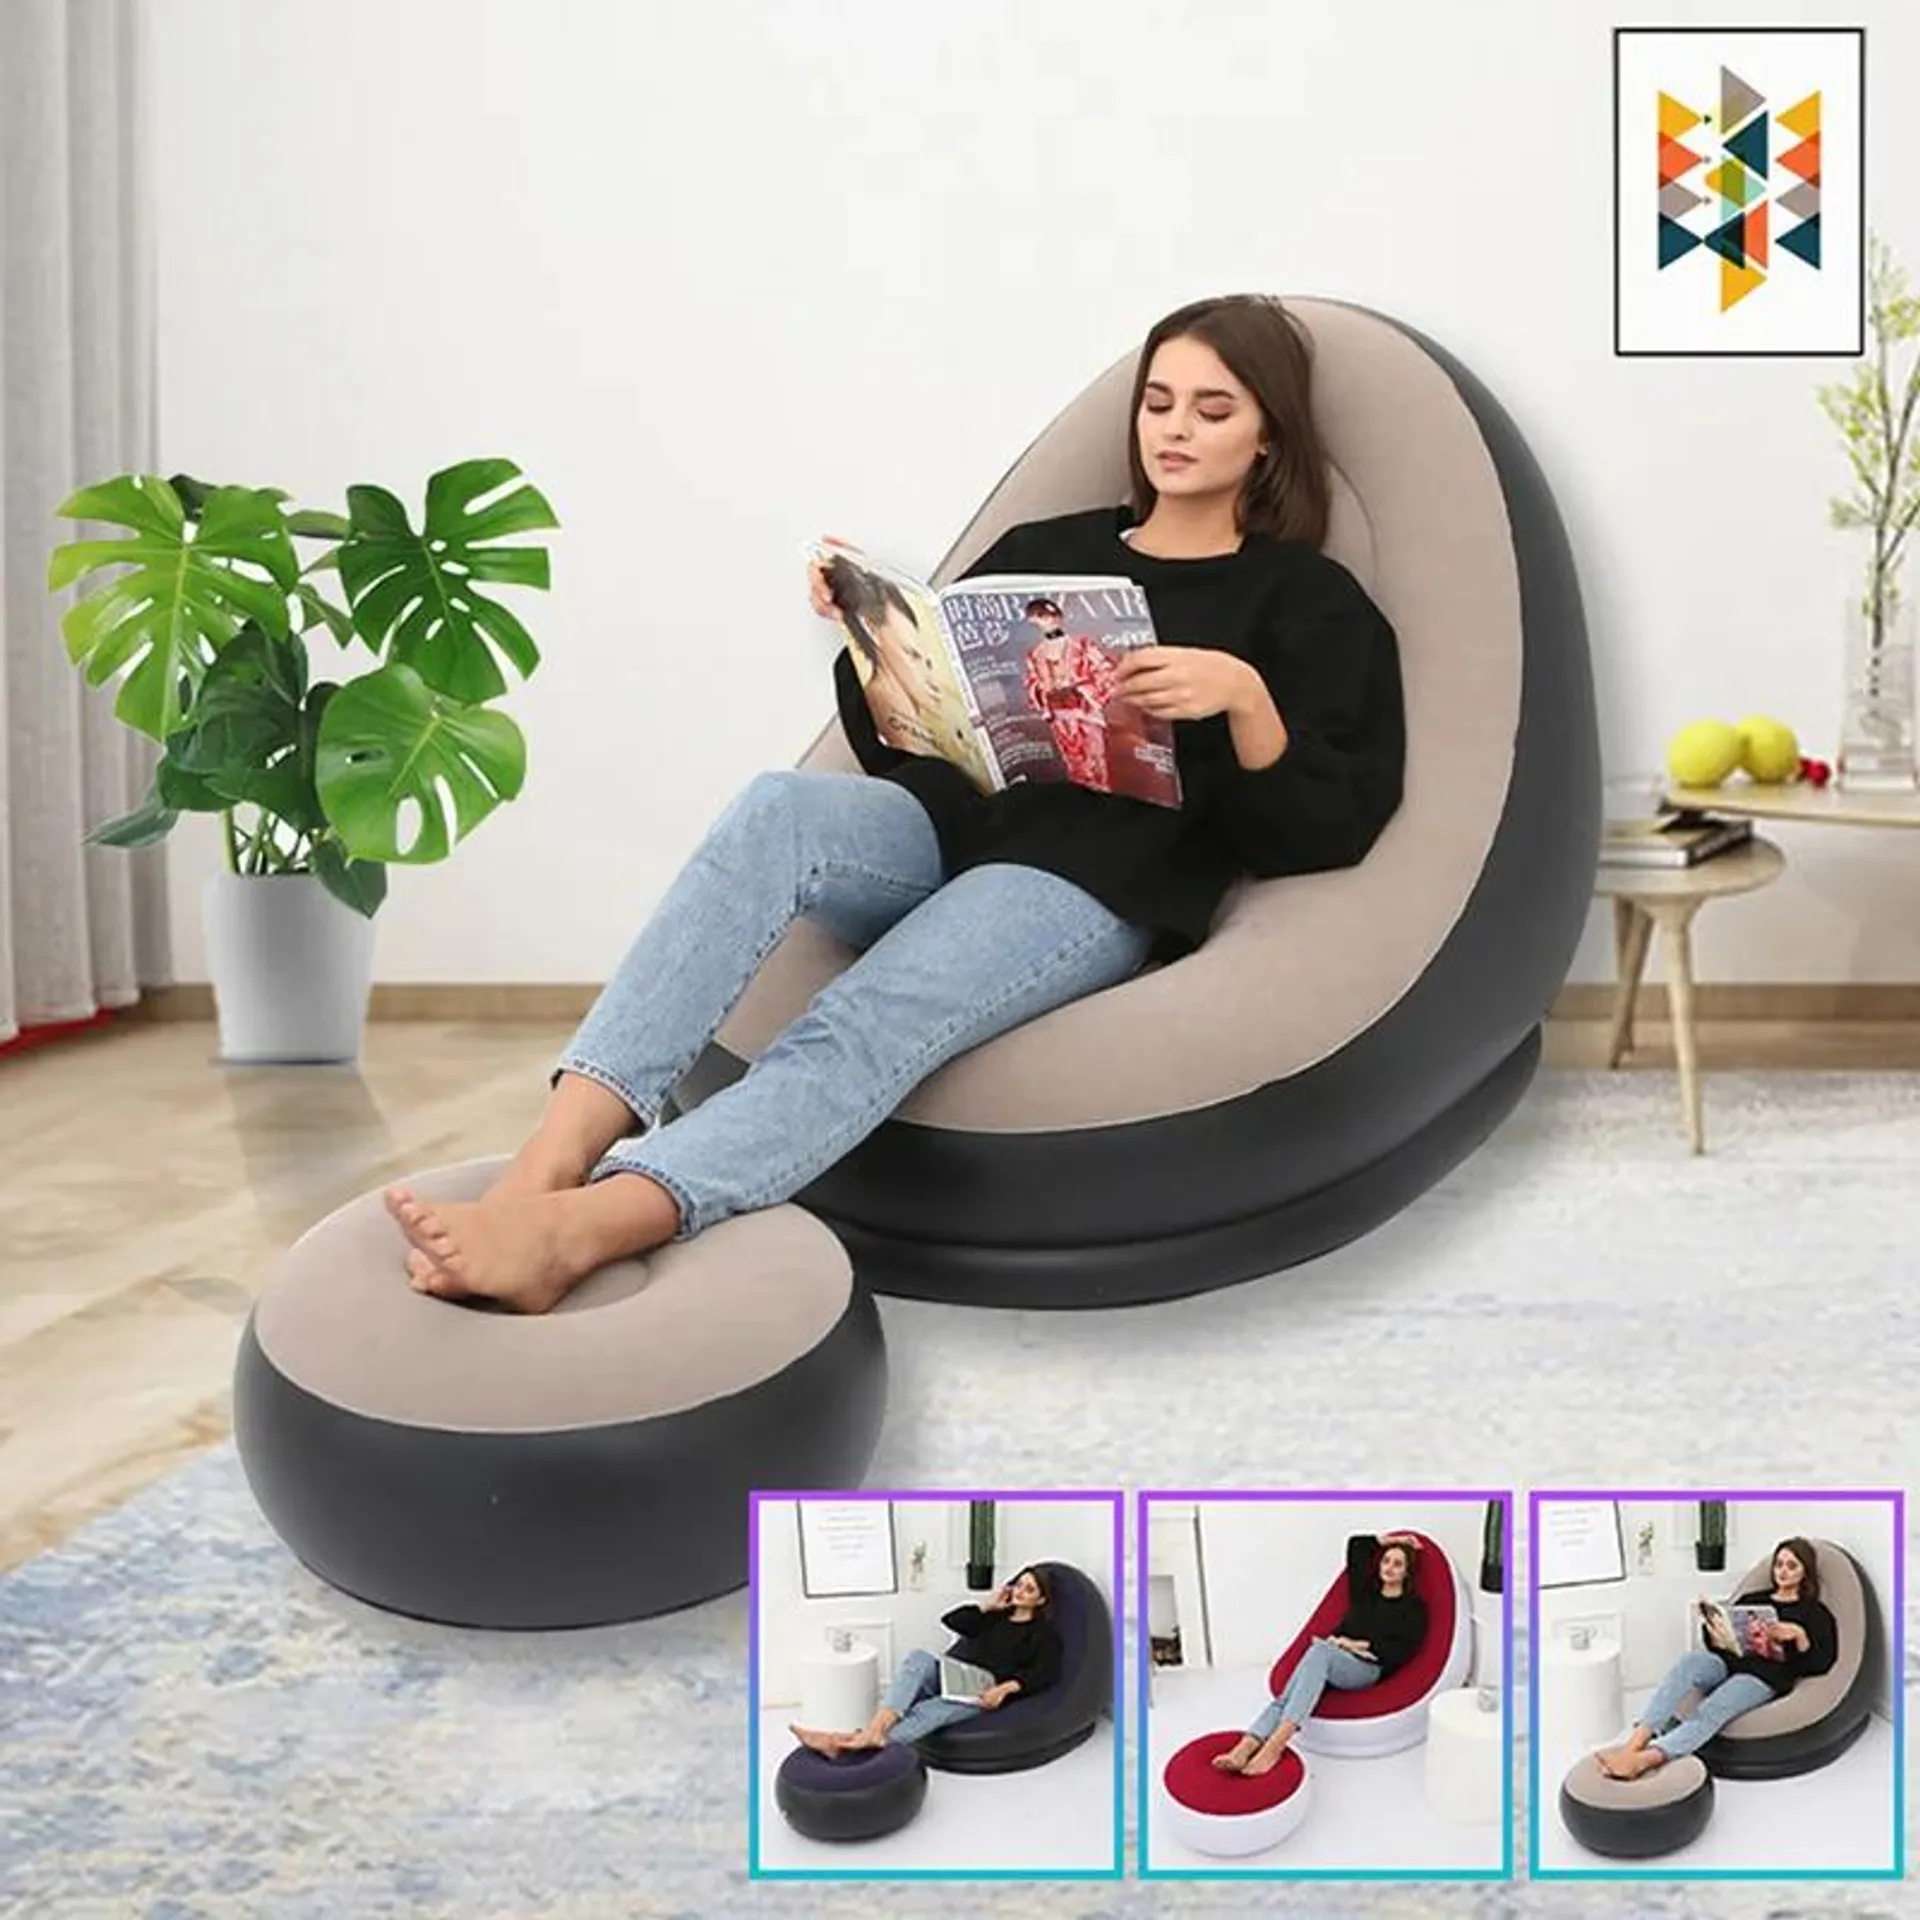 Portable Folding Inflatable Sofa Lazy BeanBag Sofas Chair Lounger Bean Bag Pouf Puff Couch Tatami Living Room